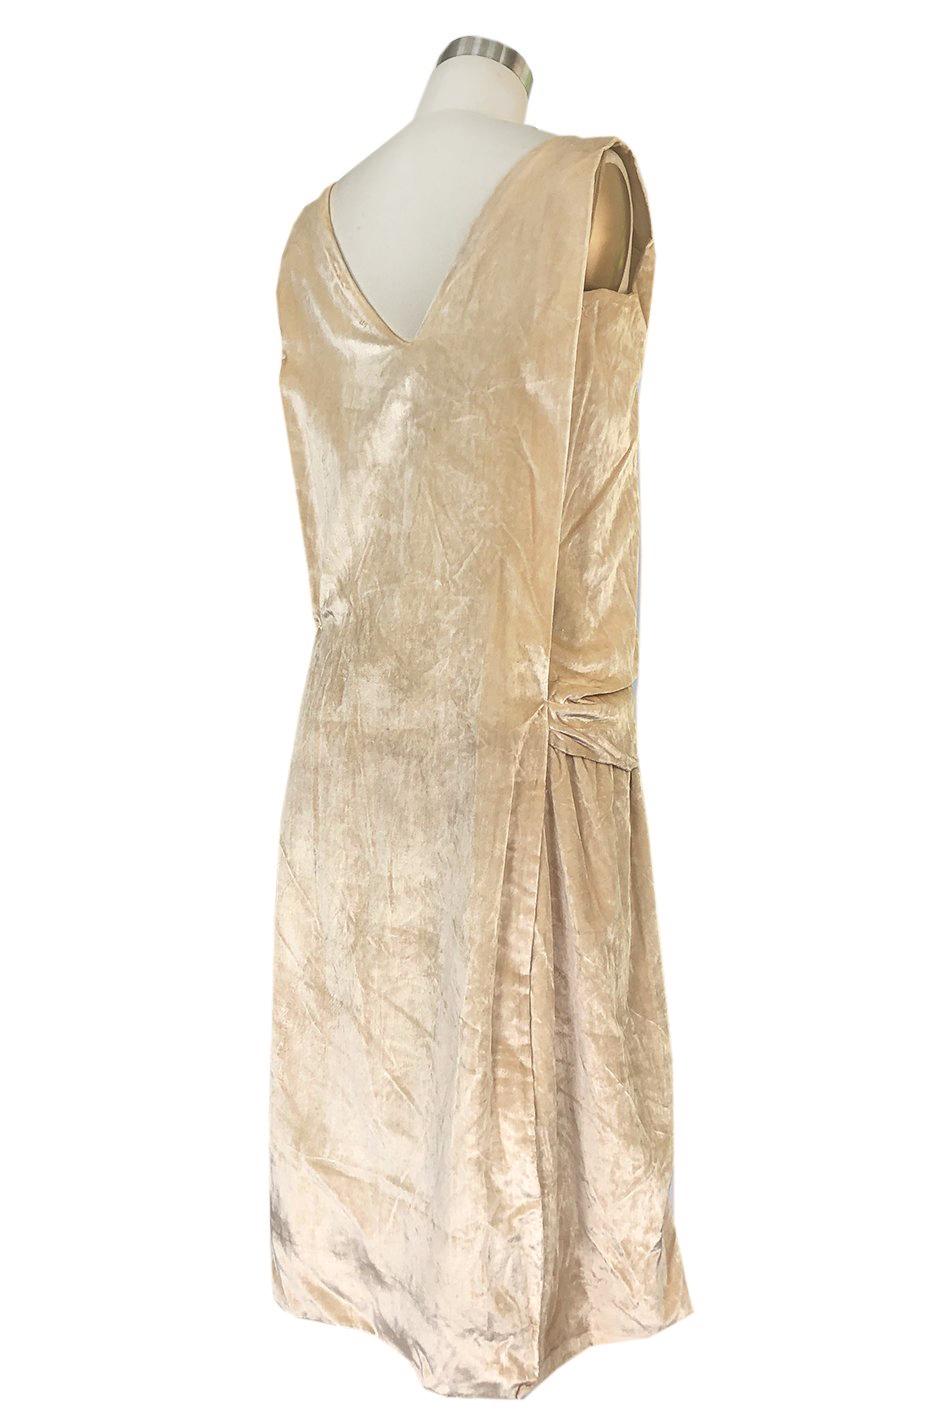 This gorgeous twenties dress combines a rich, golden tone ivory silk velvet with an inset panel of silk chiffon in the same rich color. The front panel where the silk chiffon is inlaid, has been heavily embellished with beads and faux pearls. The